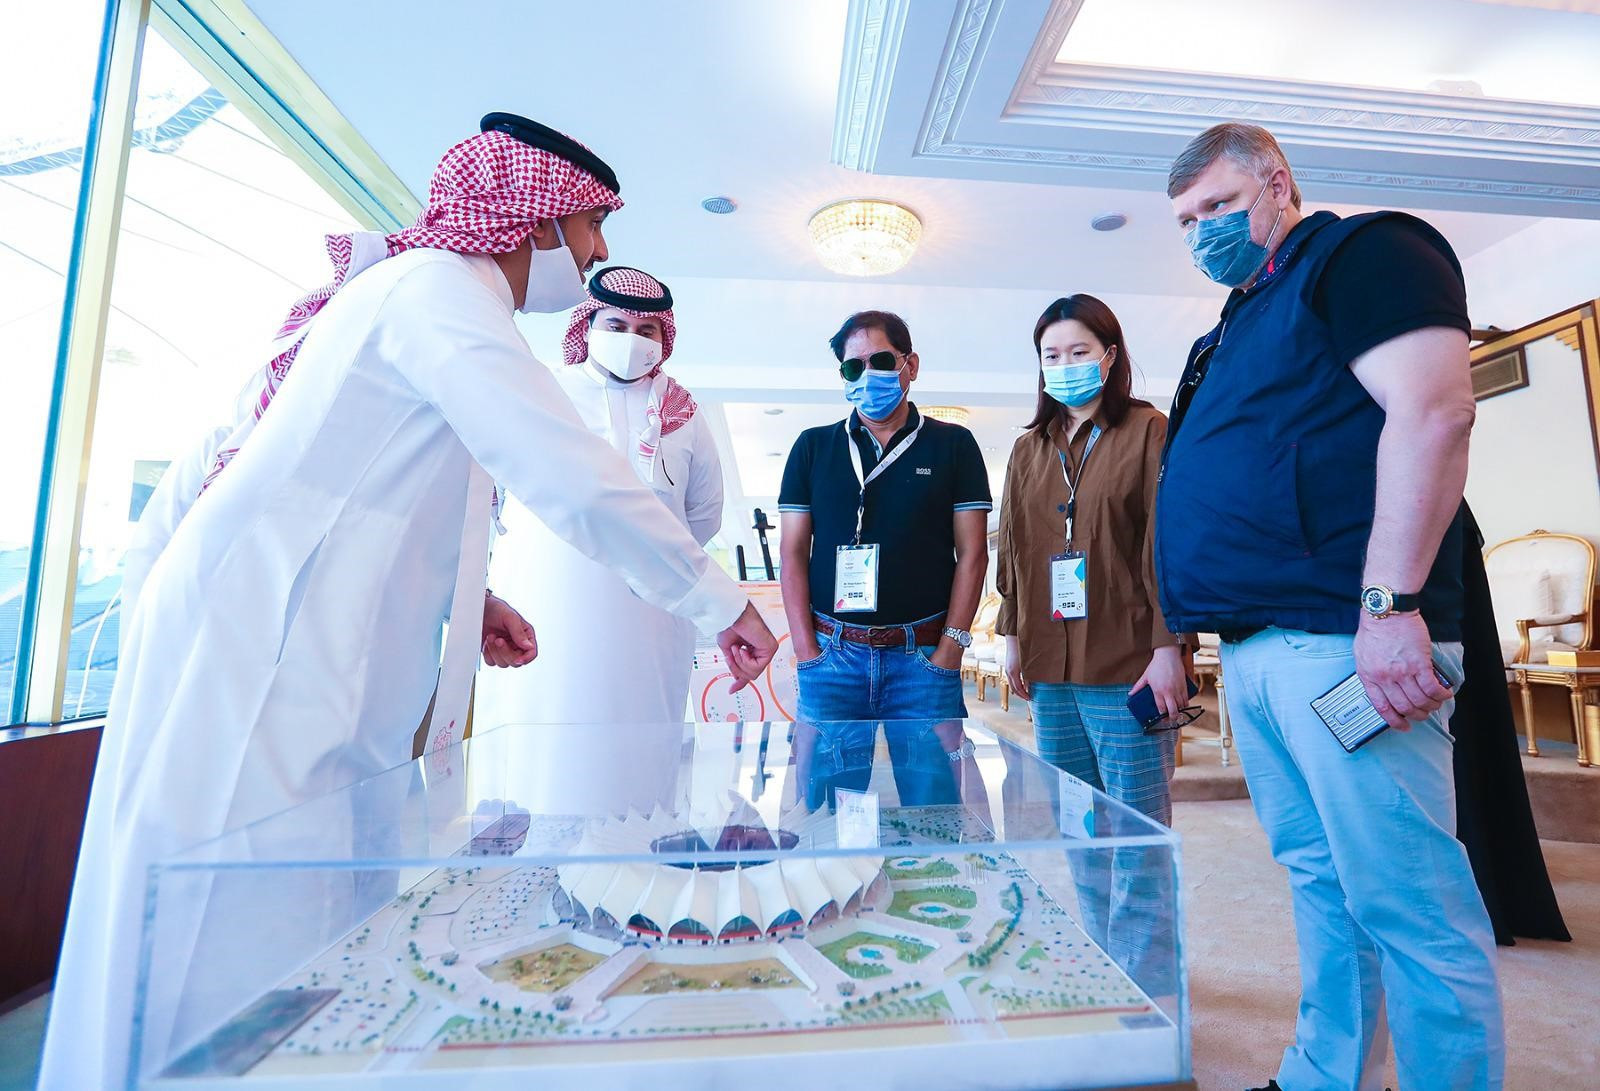 The OCA Evaluation Committee was shown the plans for the Riyadh bid for the 2030 Asian Games ©Riyadh 2030